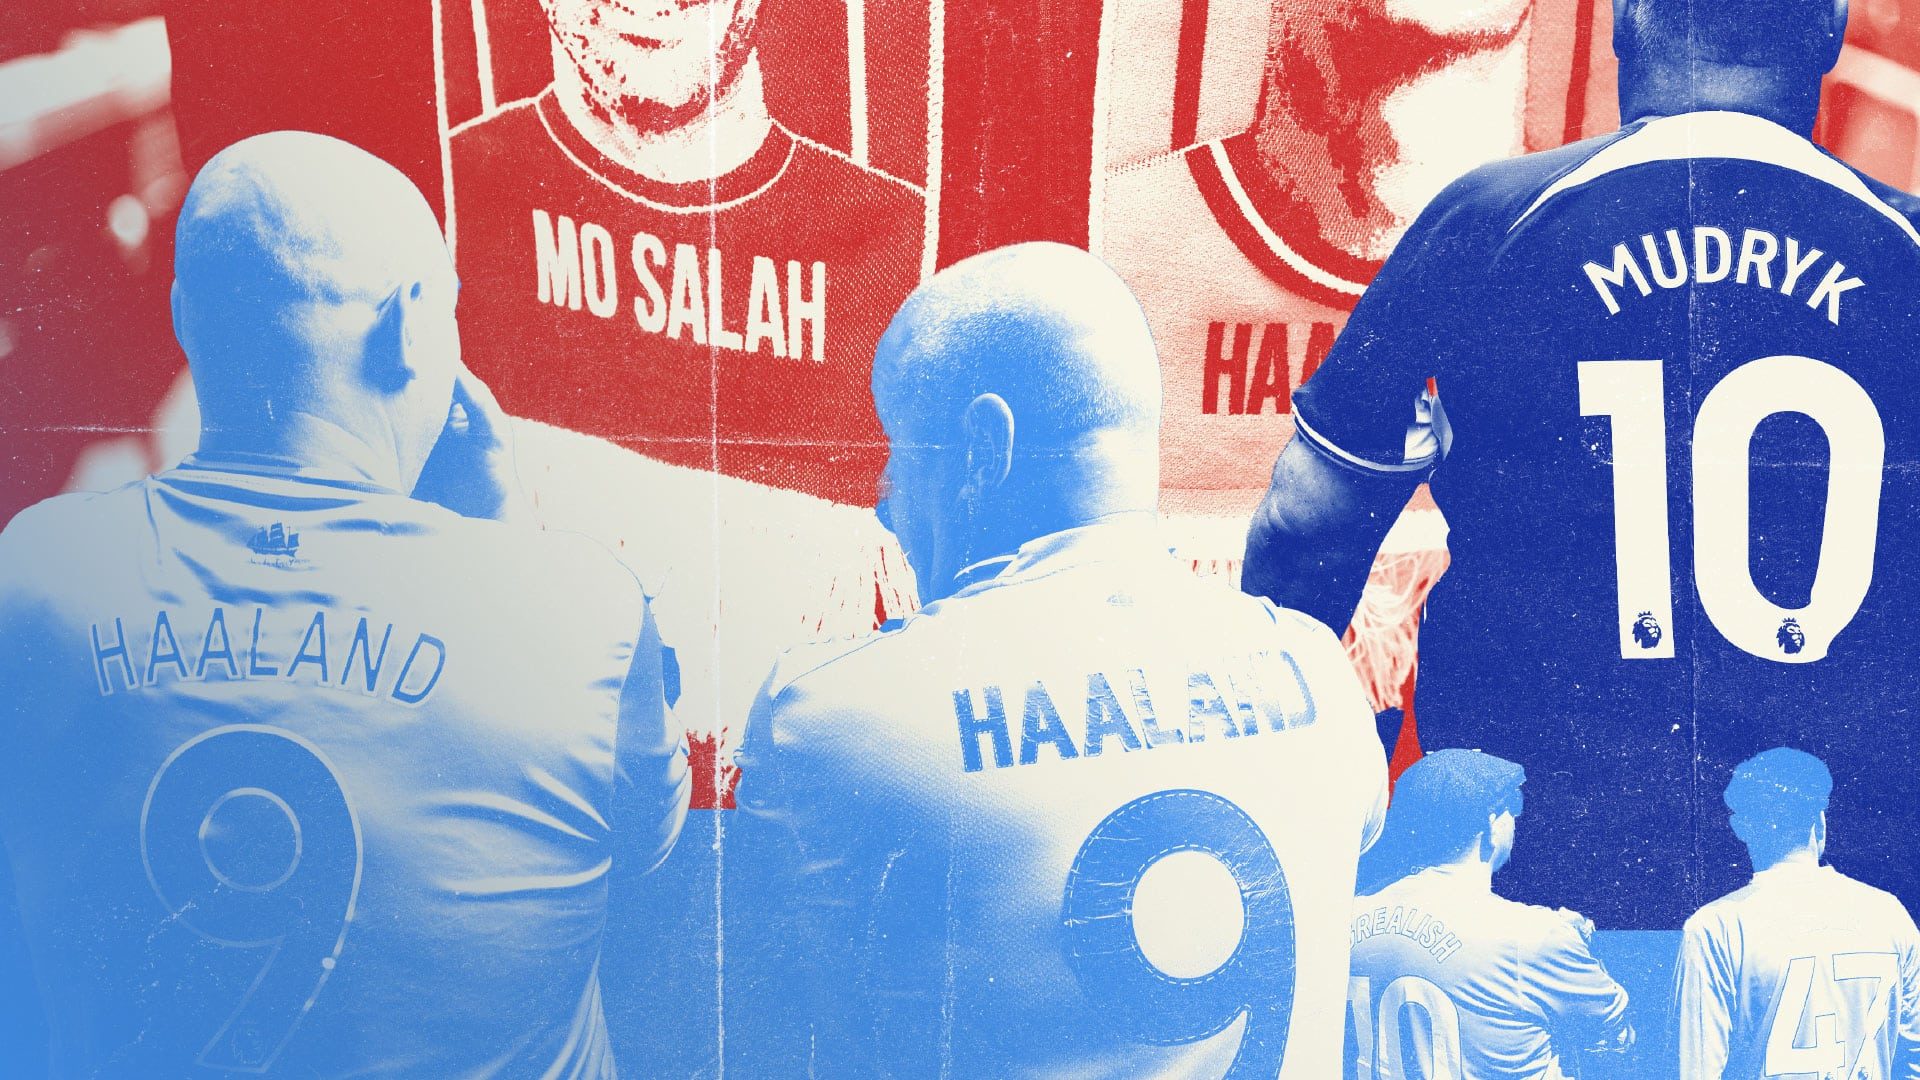 A collage of shirts from no-mark teams, with names like Haaland and Salah printed on the back